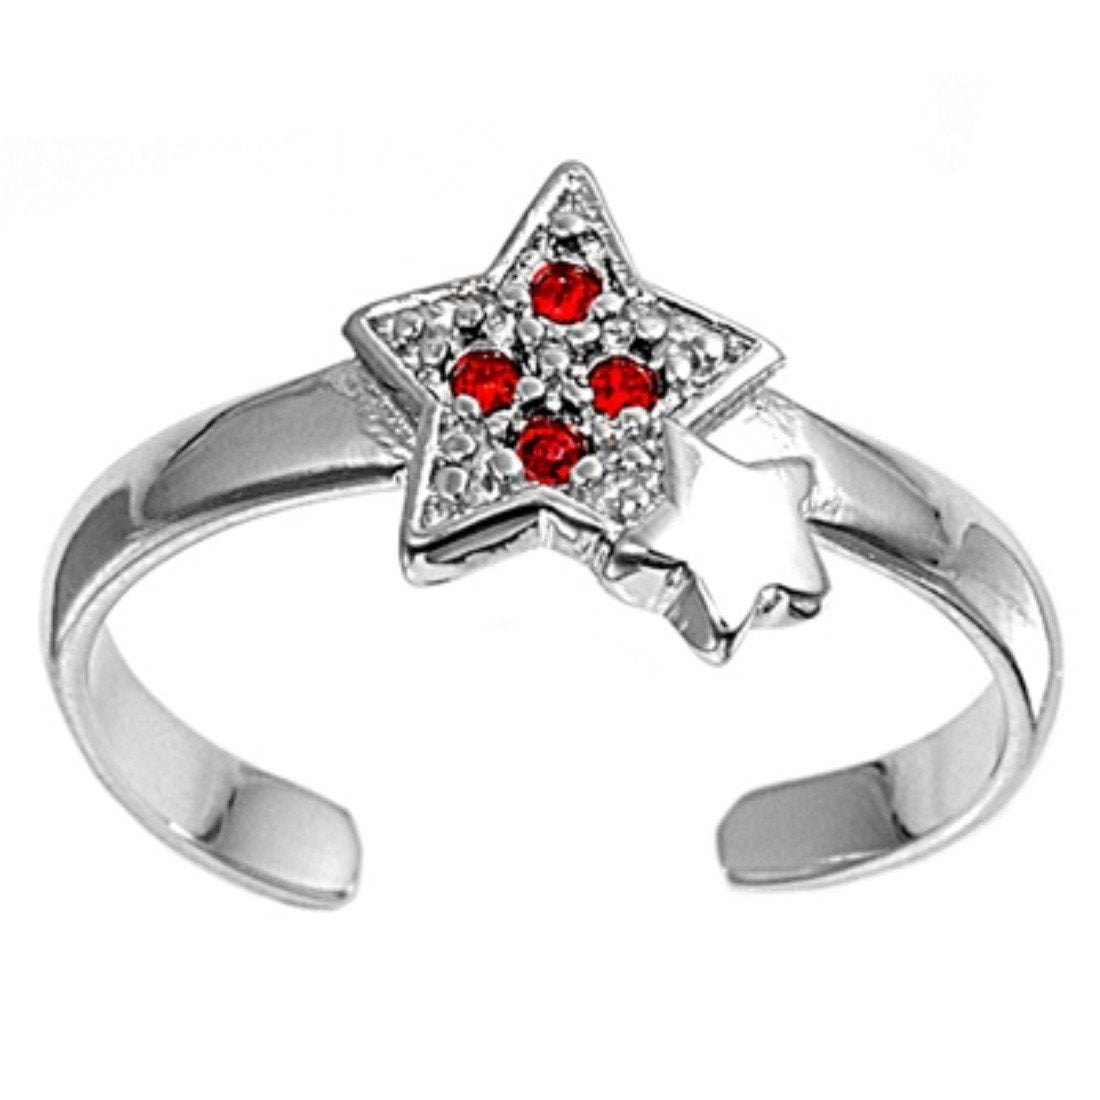 Silver Toe Ring Star Simulated Cubic Zirconia Adjustable 925 Sterling Silver (8mm)